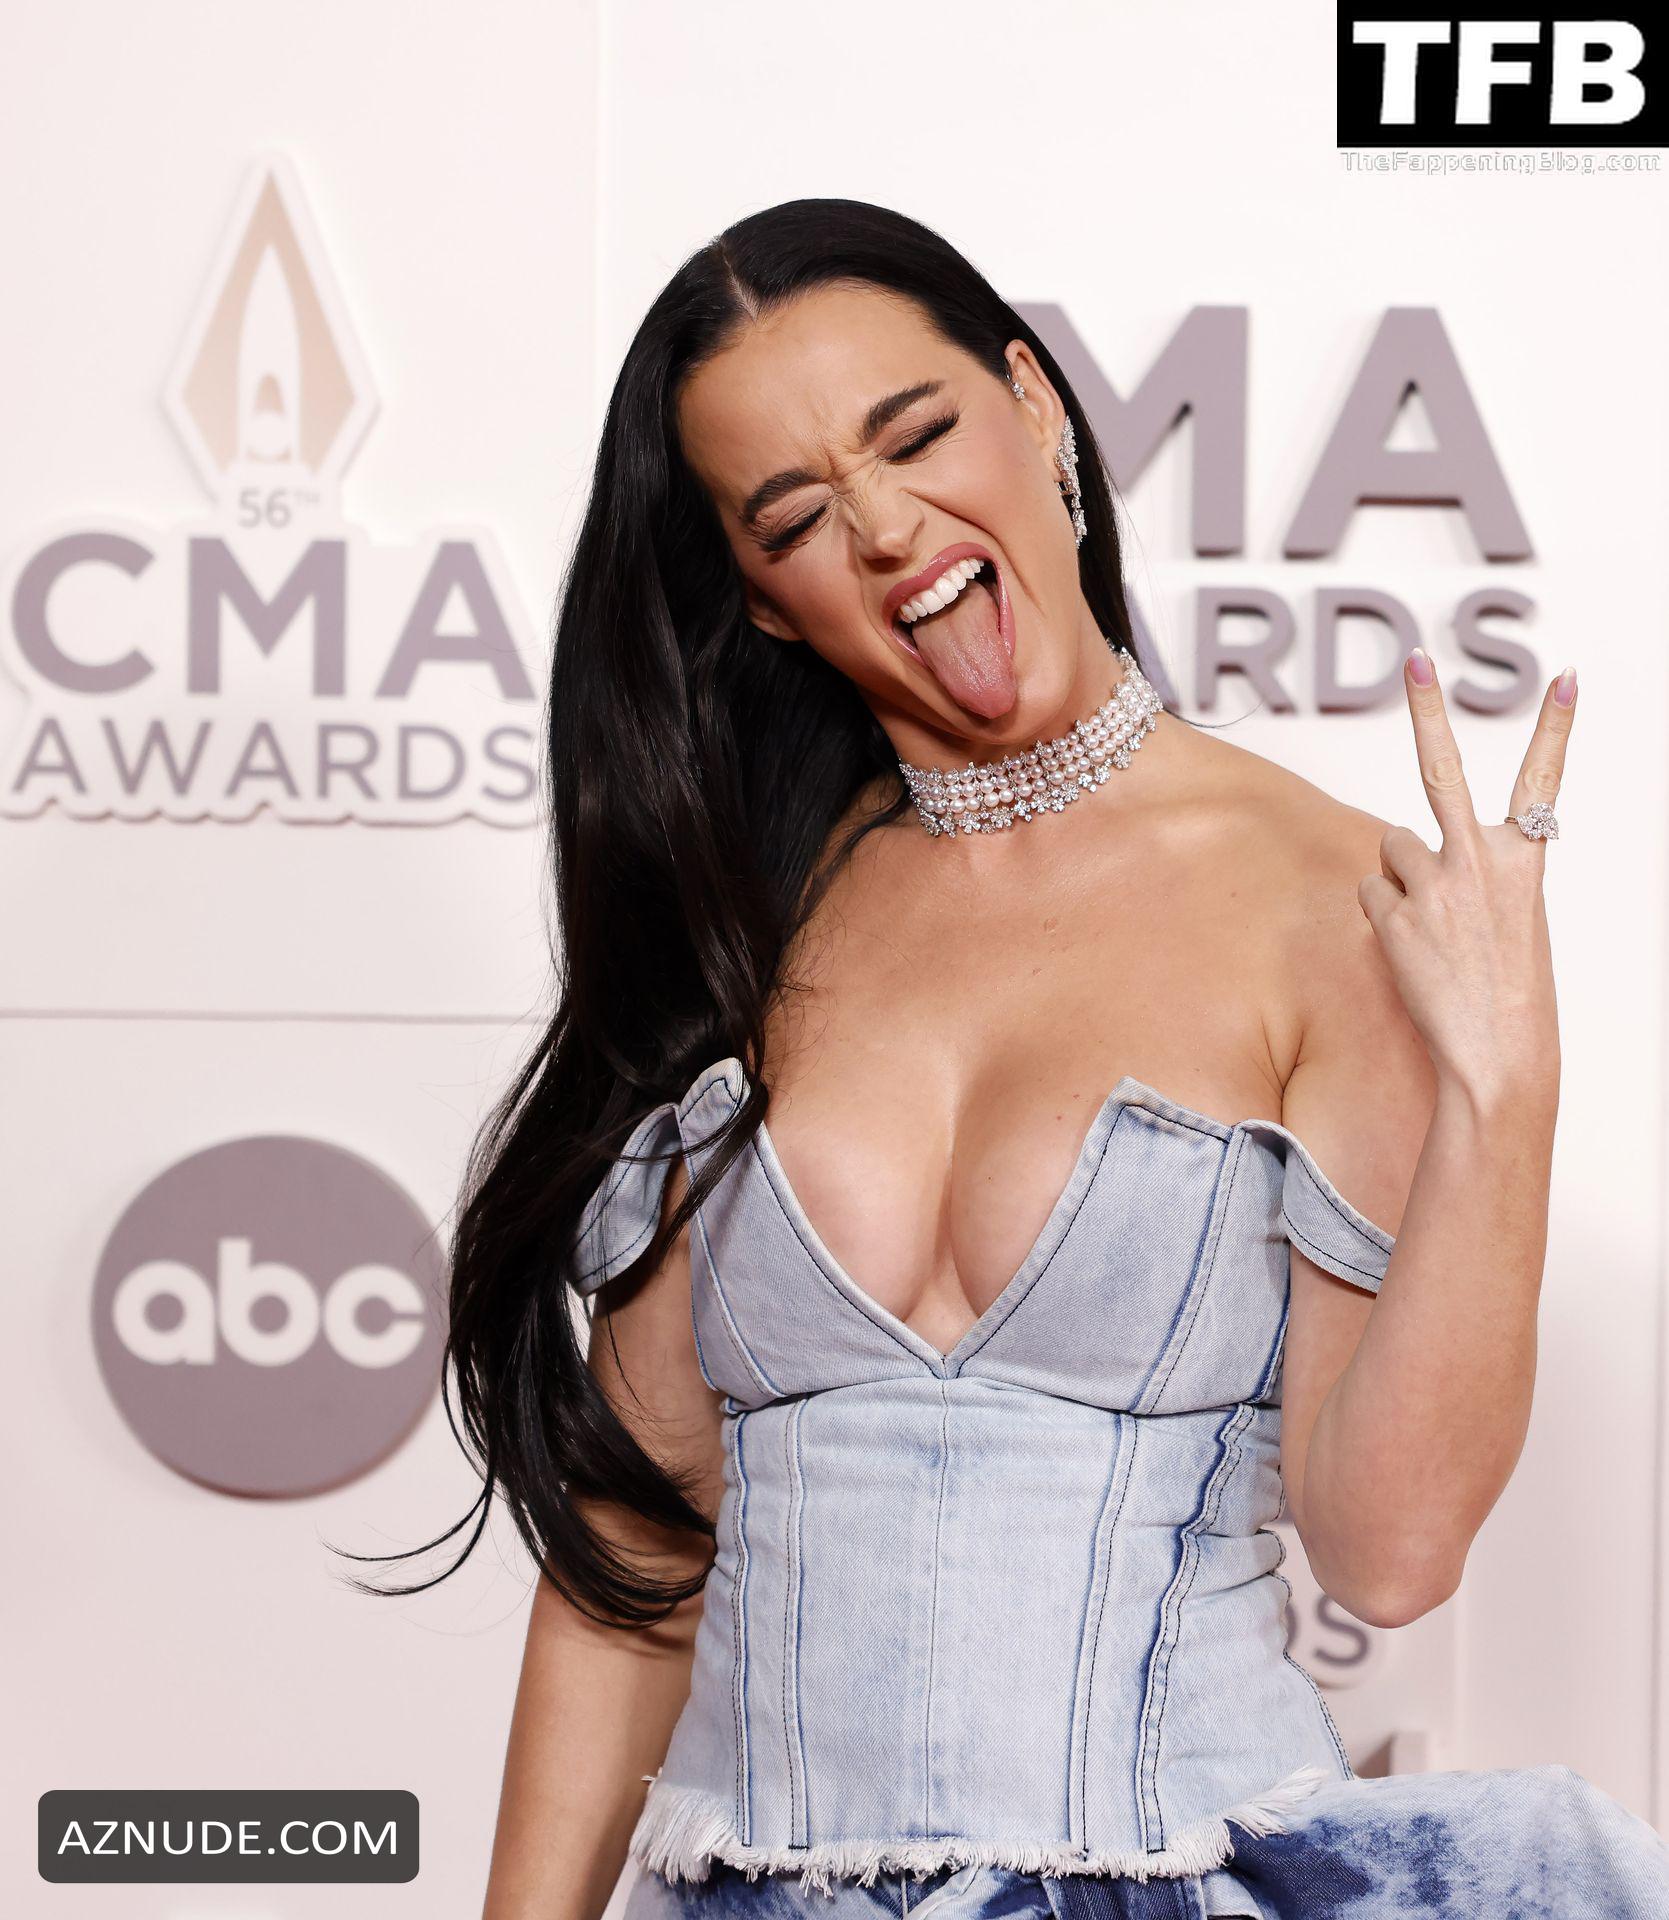 Best of Katy perry naked boobs